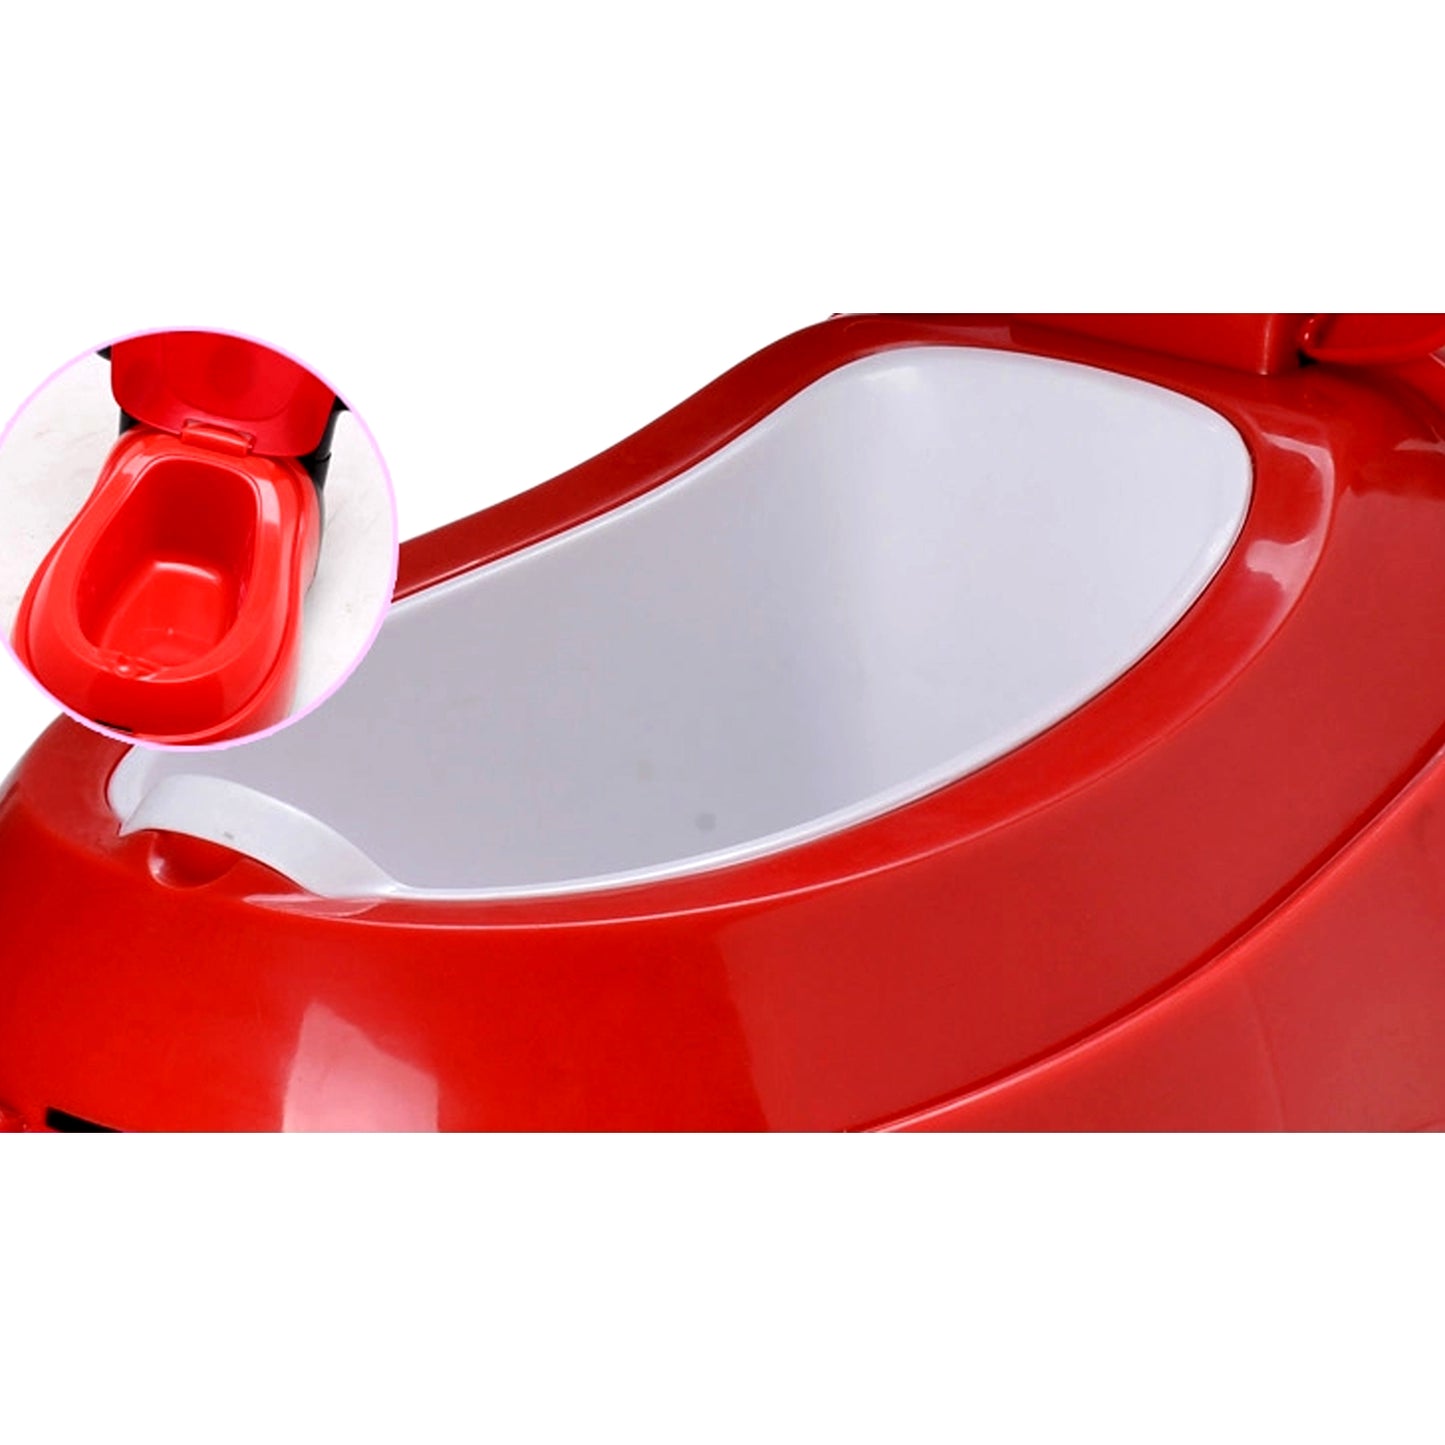 Insect Shaped Potty Trainer